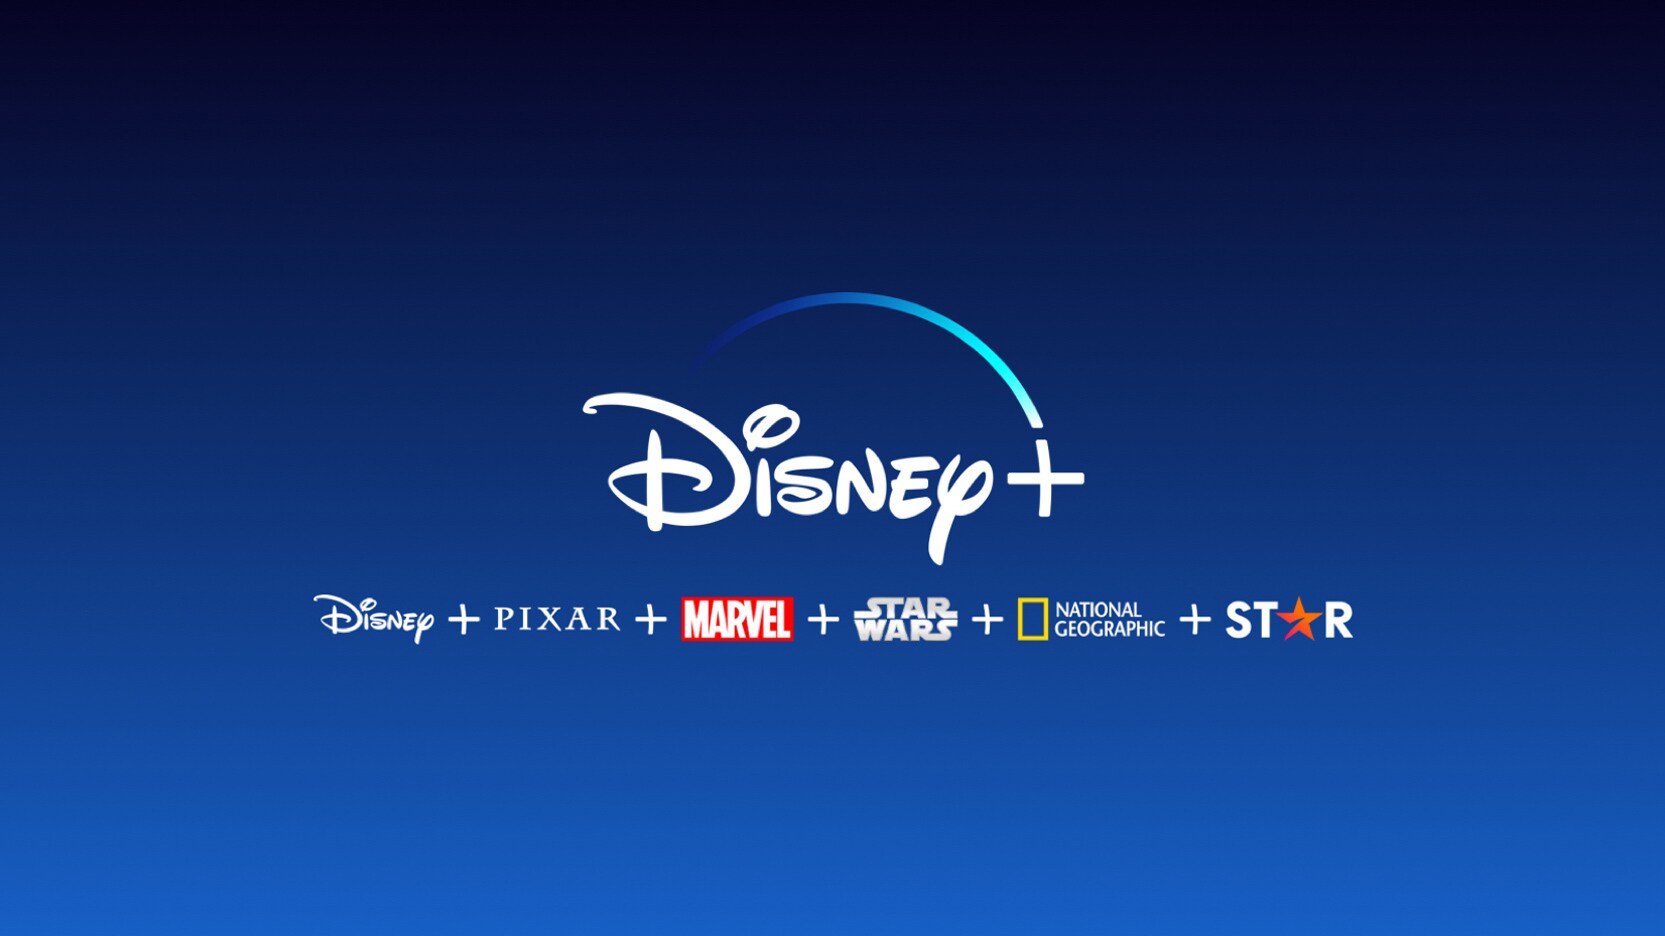 DISNEY+ TO INTRODUCE AN AD-SUPPORTED SUBSCRIPTION OFFERING IN LATE 2022